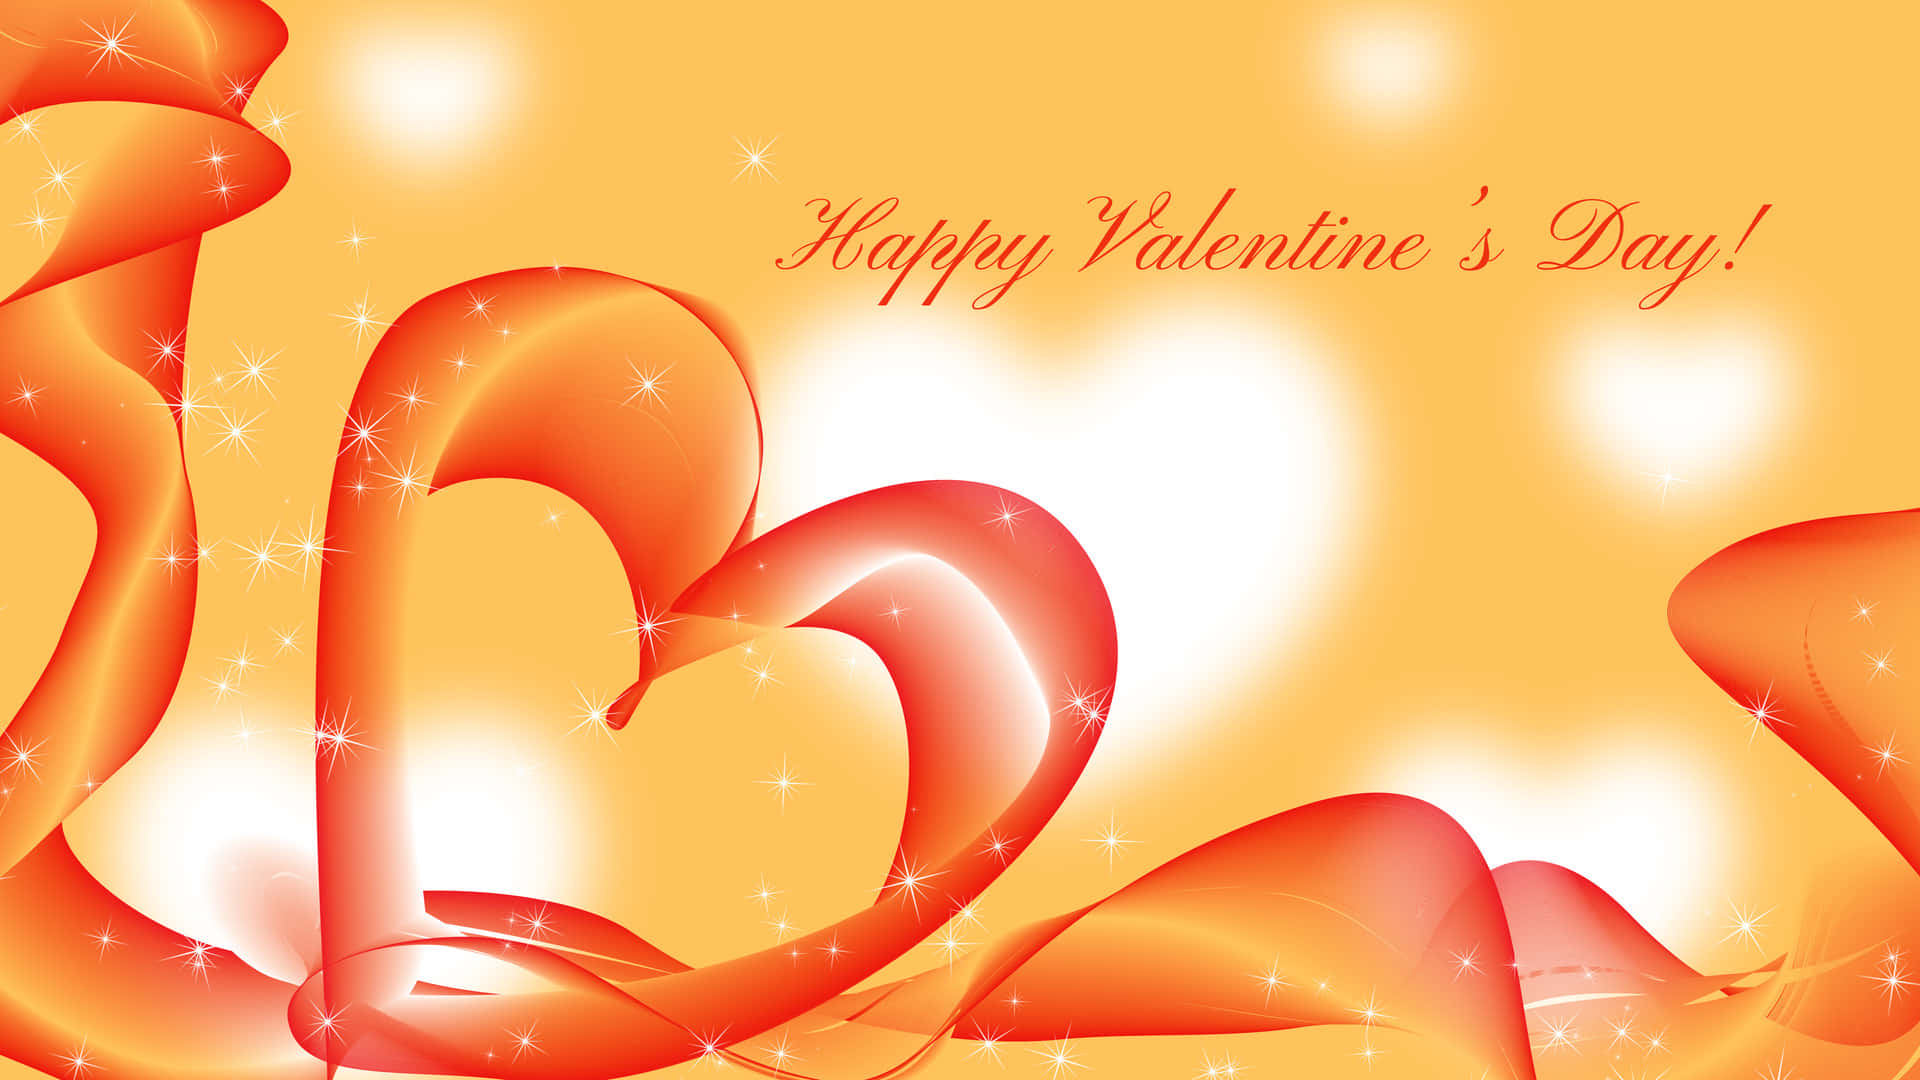 Celebrate the day of love with your special one